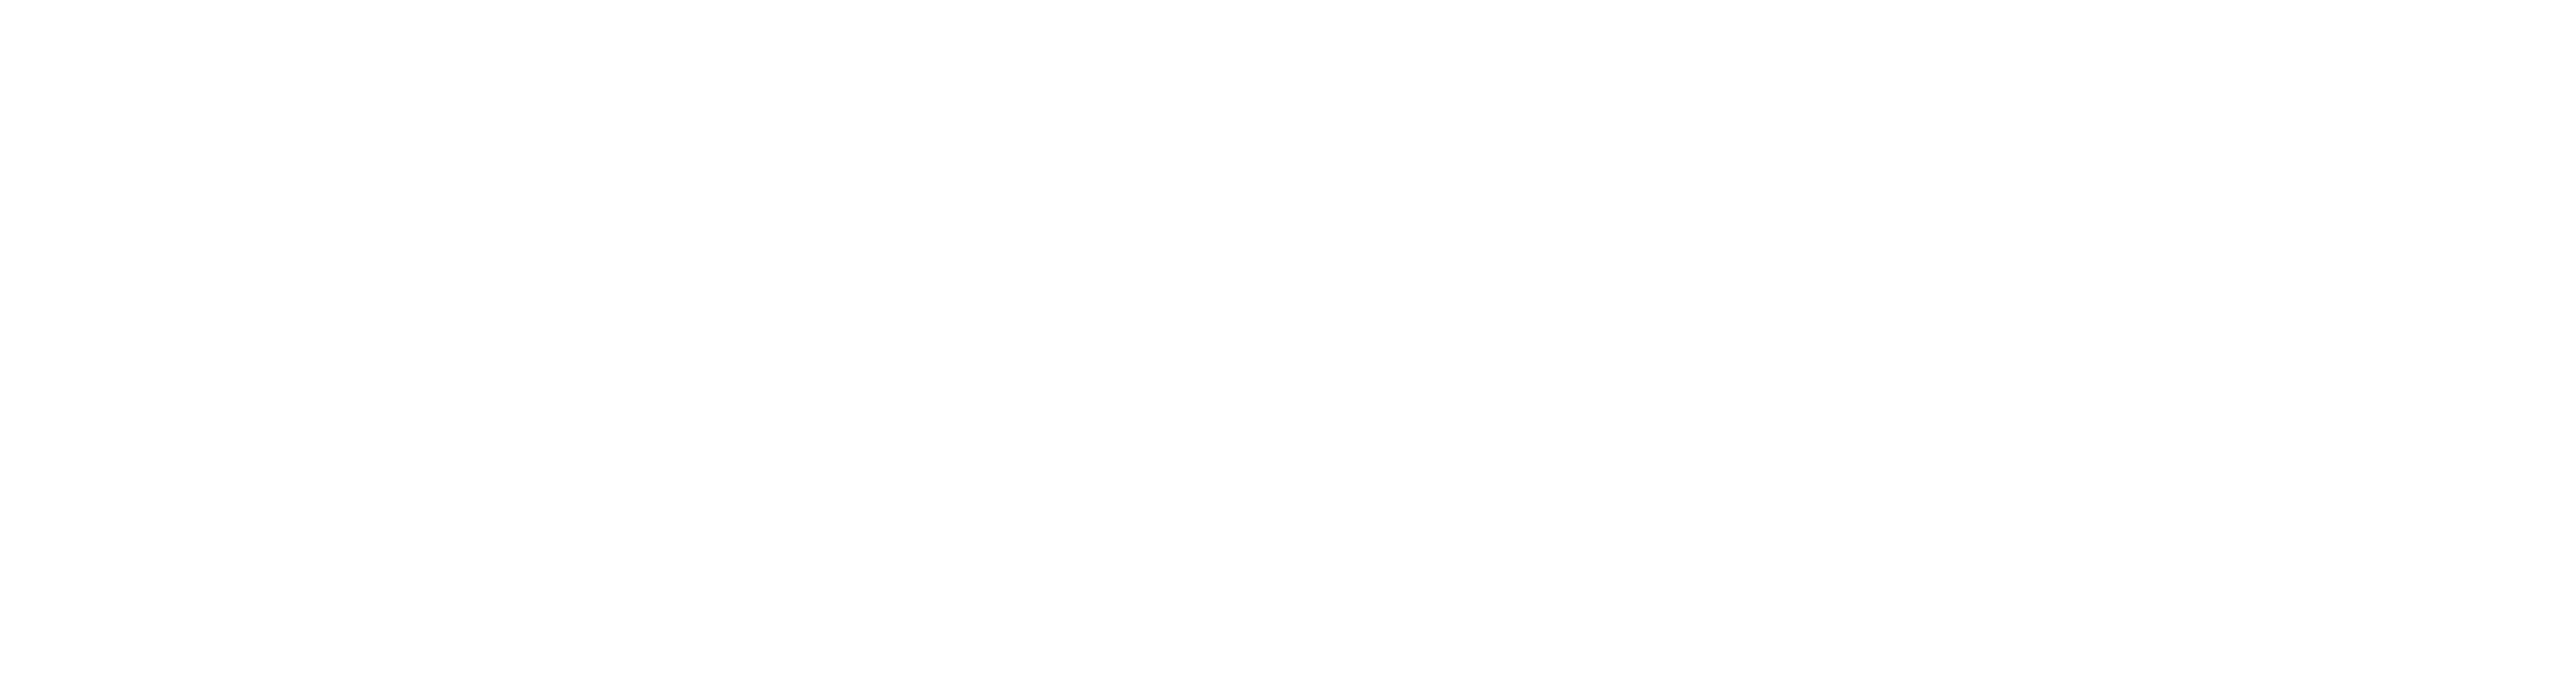 Logo Carlyle Credit Income Fund Shares of Beneficial Interest